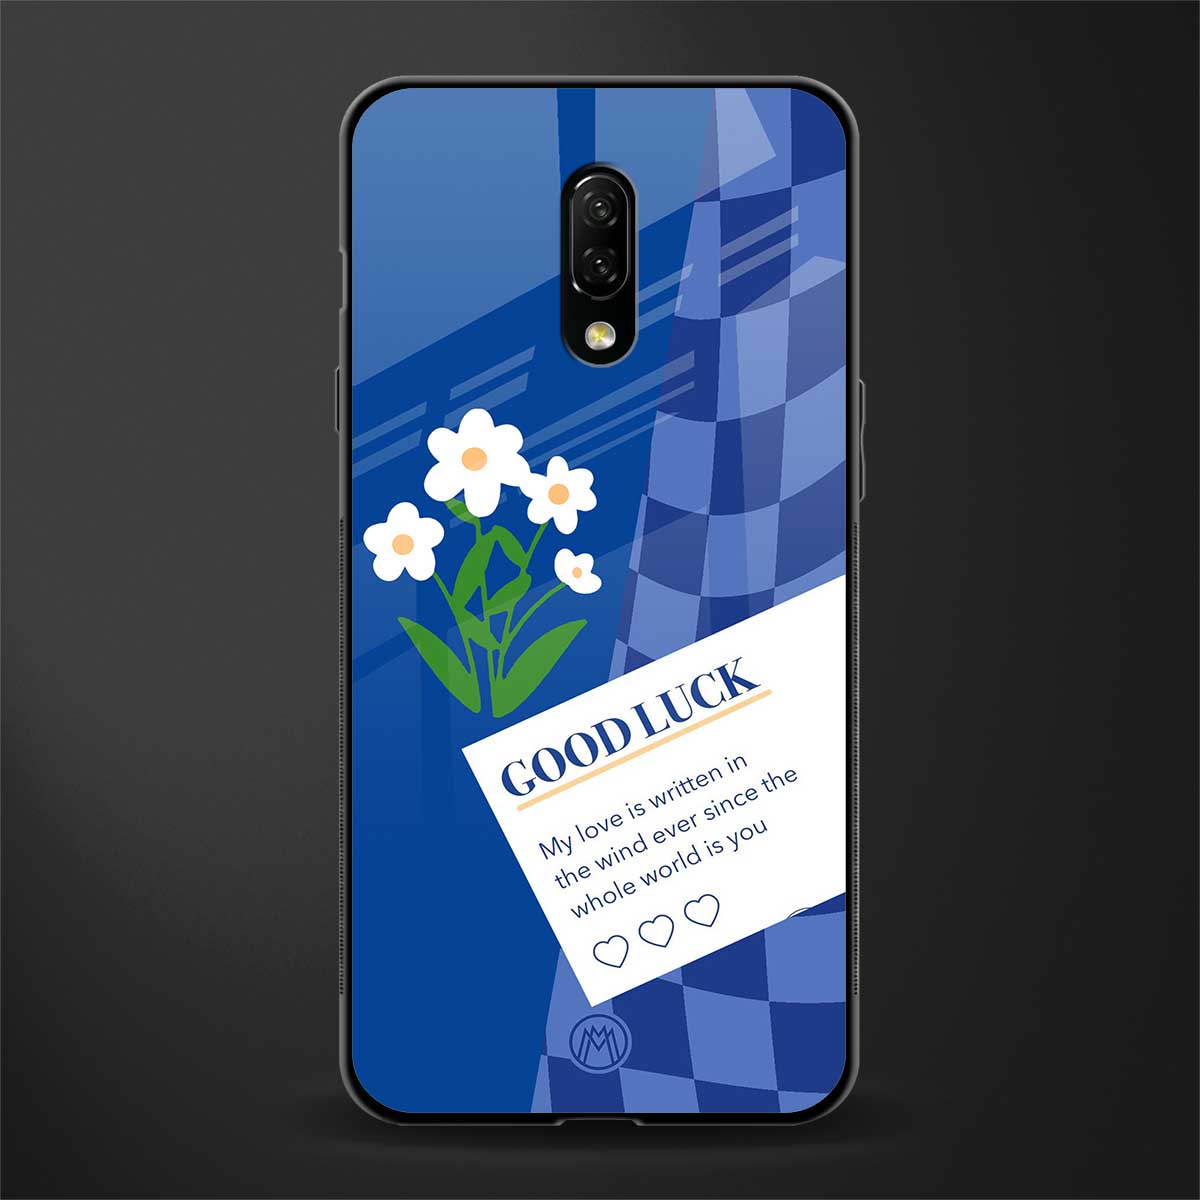 you're my world blue edition glass case for oneplus 7 image